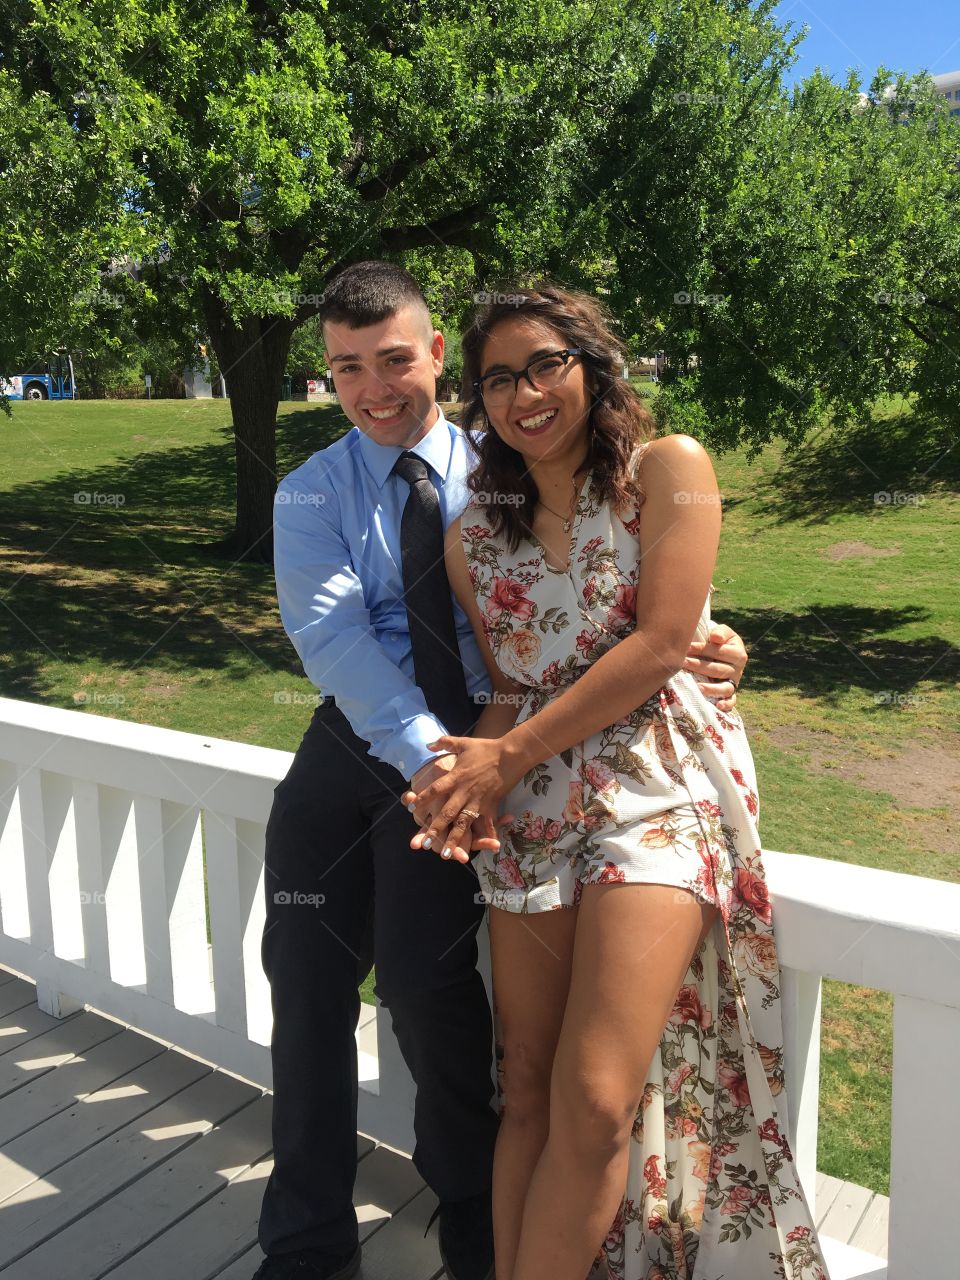 A newlywed couple sits on the ledge of a white gazebo. She wears a floral romper/dress, he wears a powder blue button-up. He has his one arm wrapped around her, the other is holding her hand. Both look at the camera with loving smiles. 